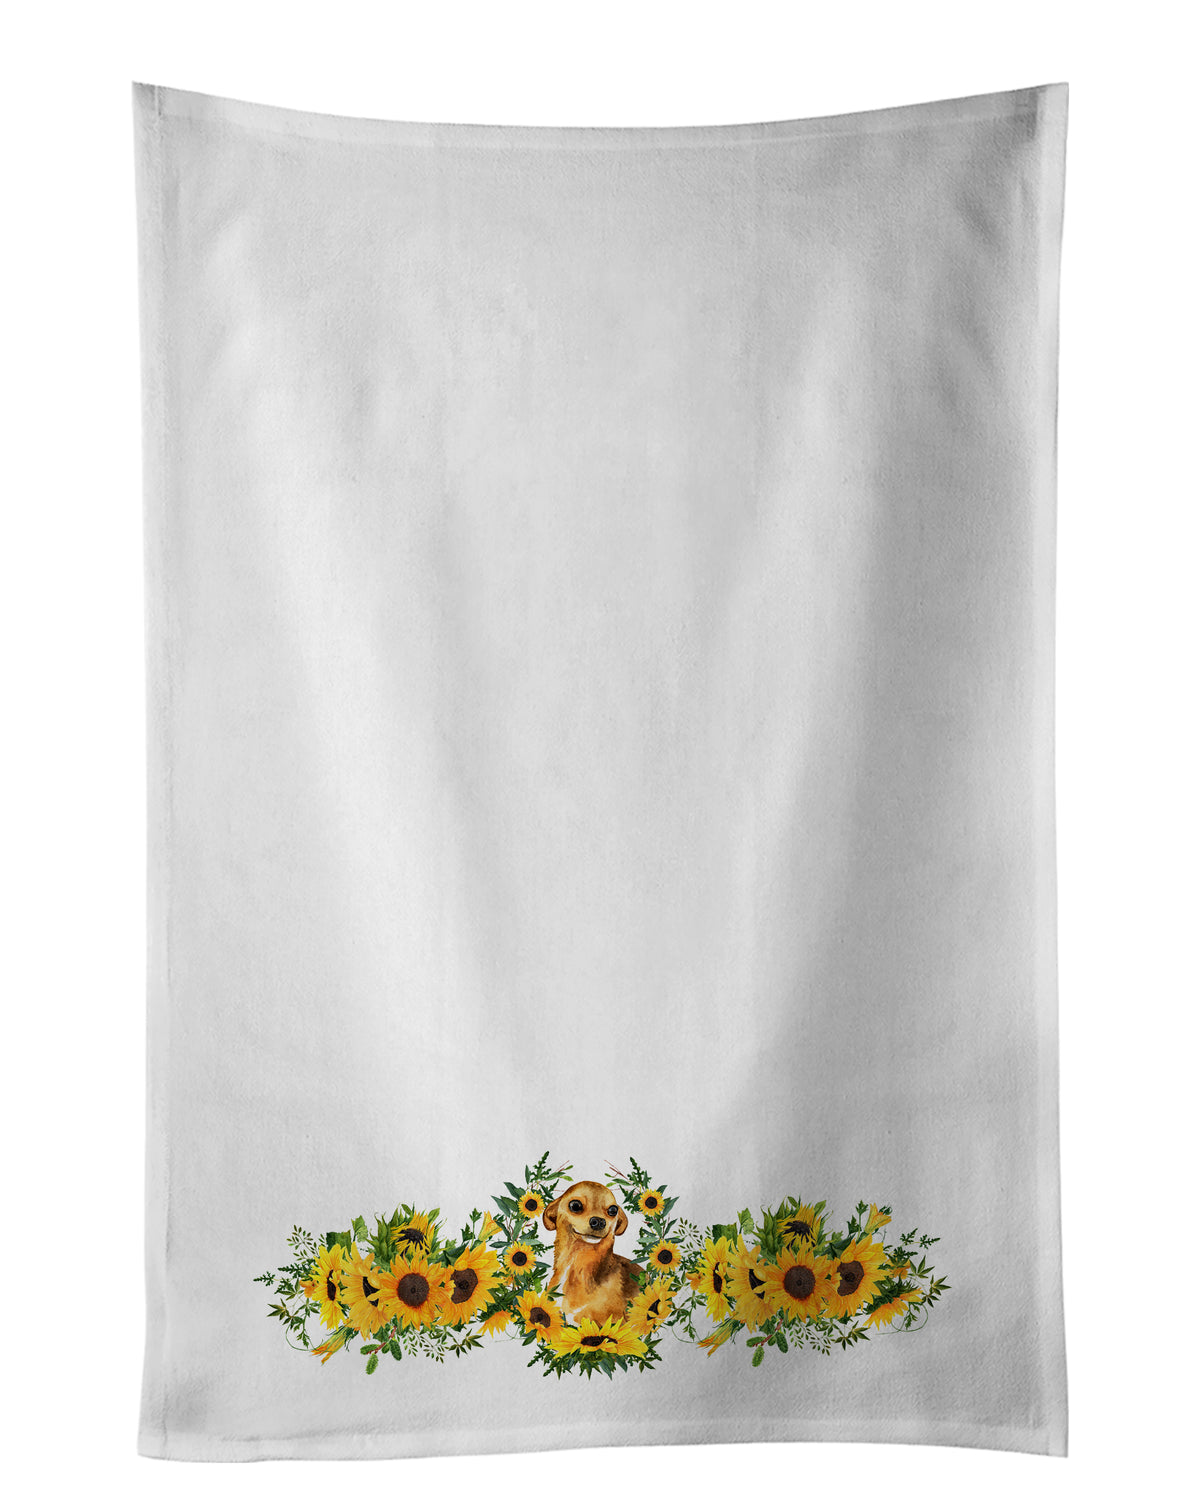 Buy this Chihuahua in Sunflowers White Kitchen Towel Set of 2